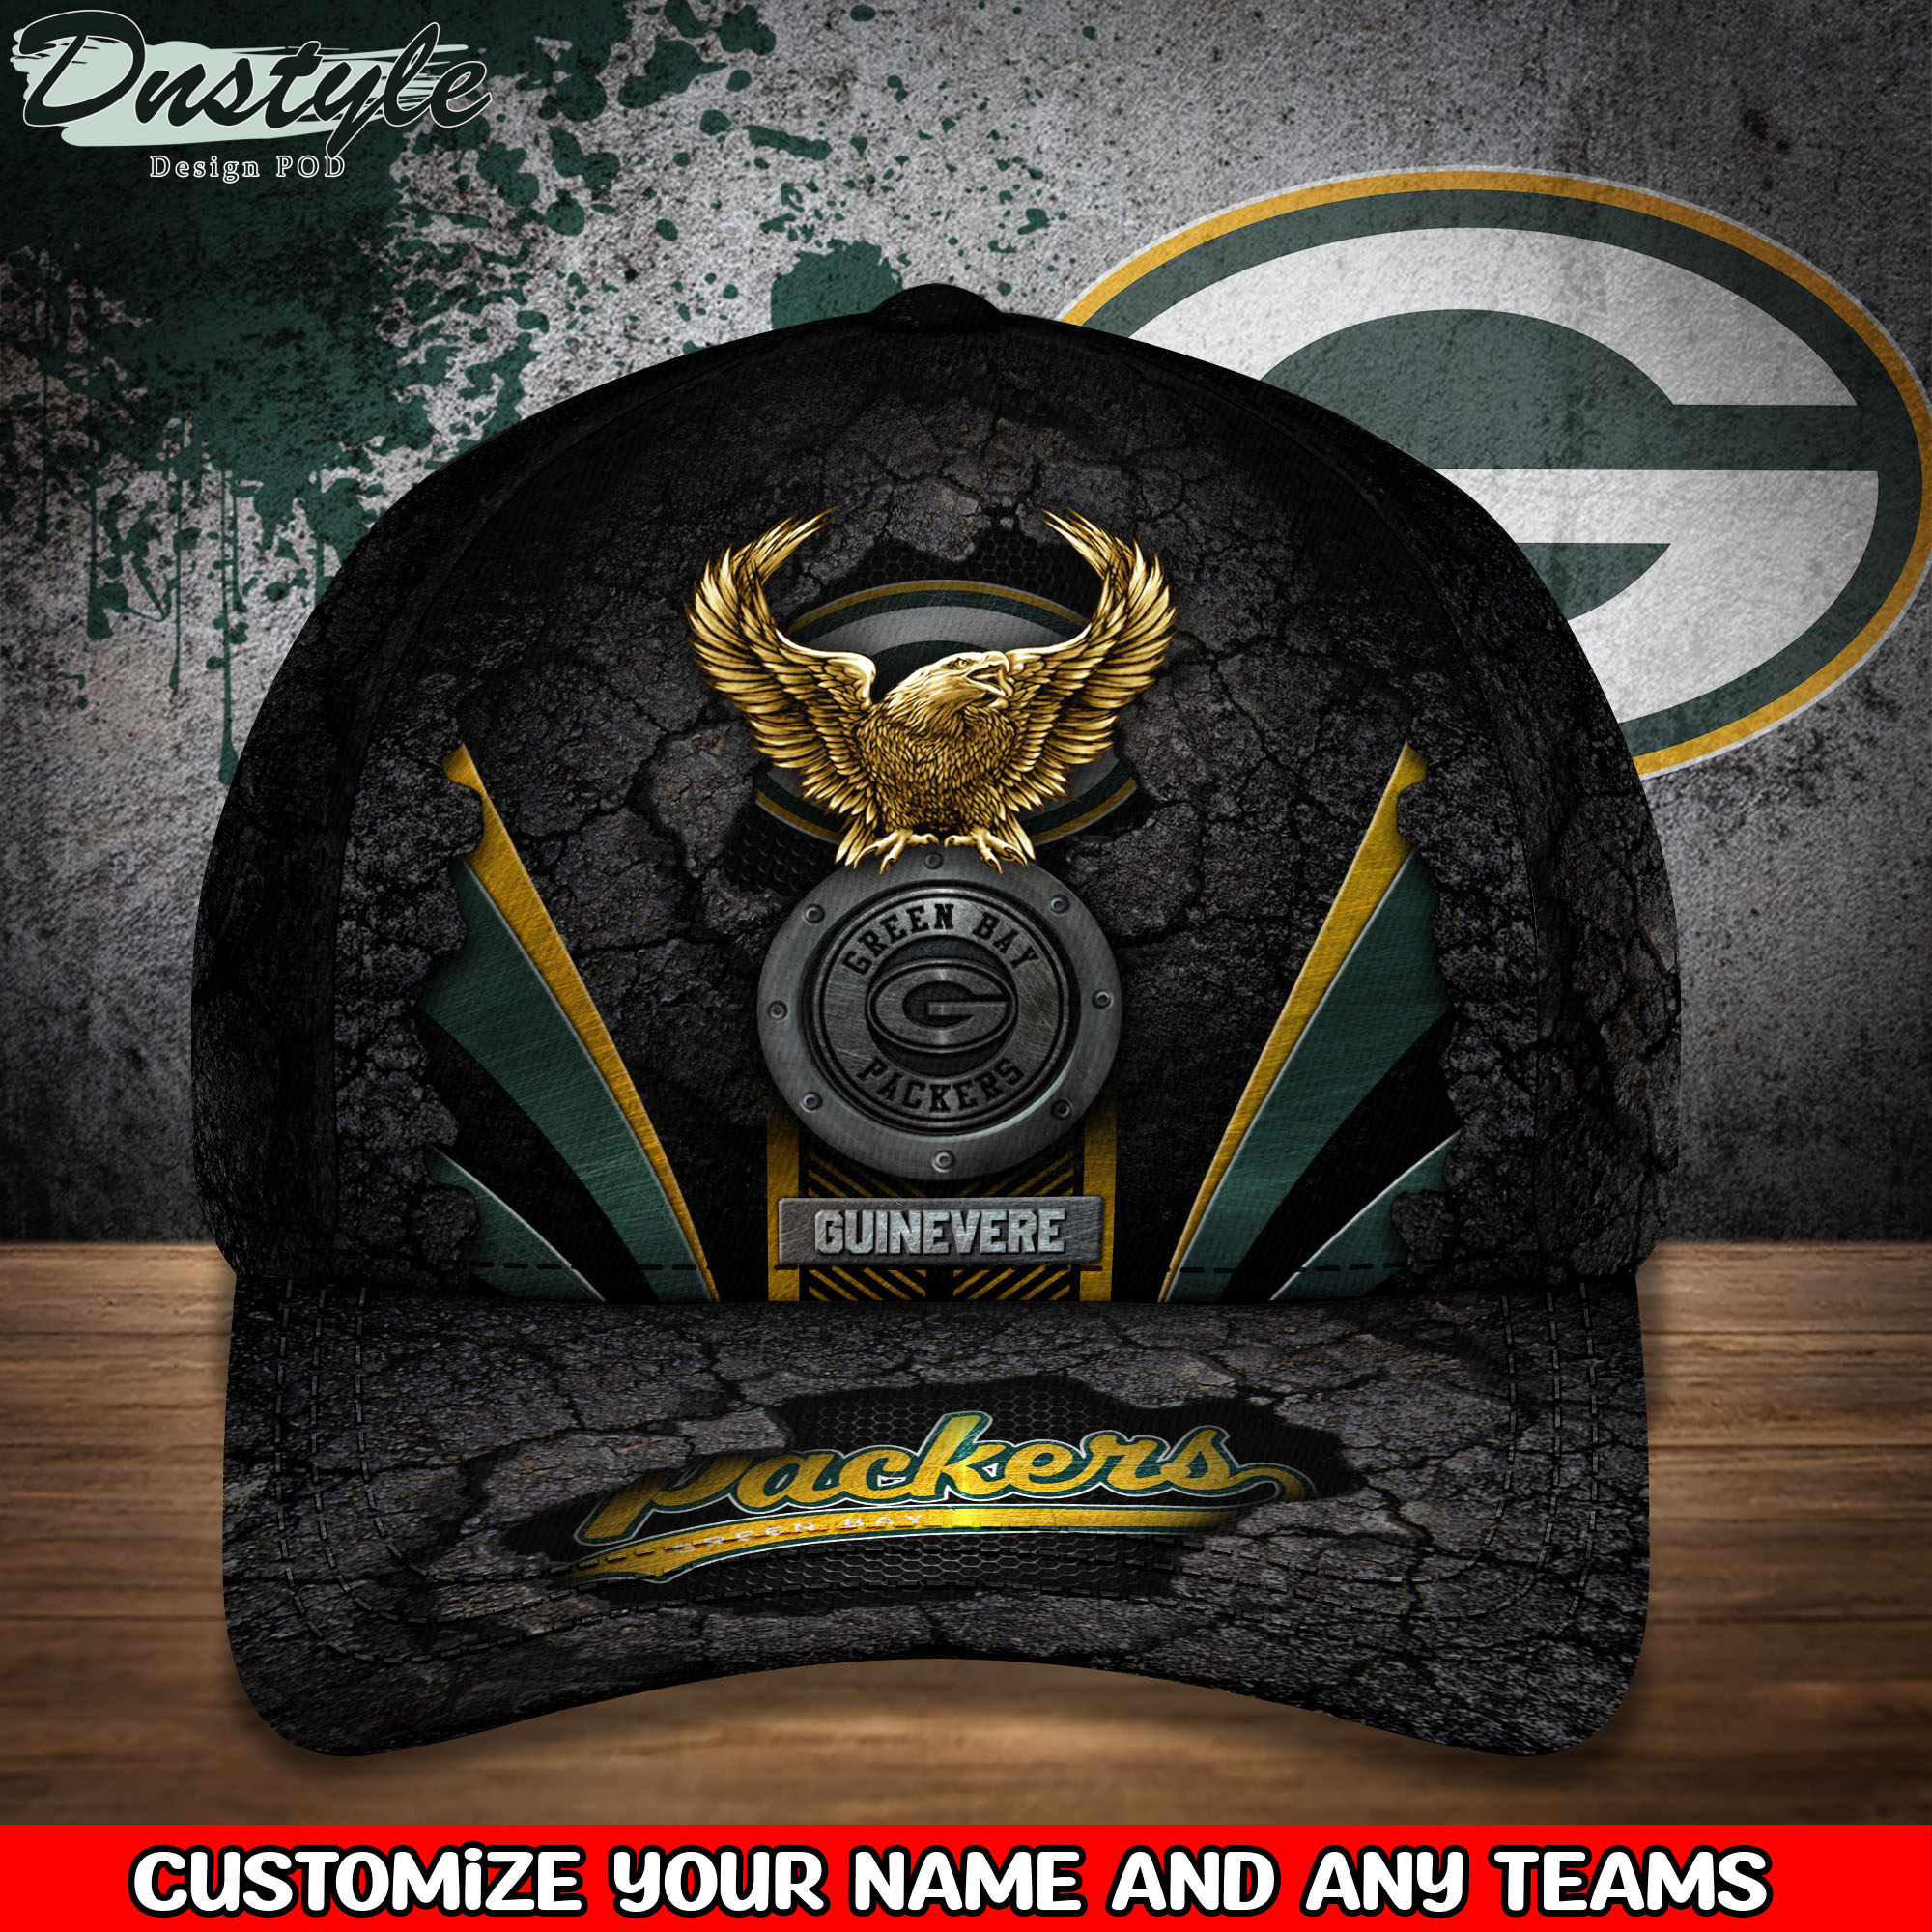 Green Bay Packers Sports Team With American Eagle Badge Baseball Cap